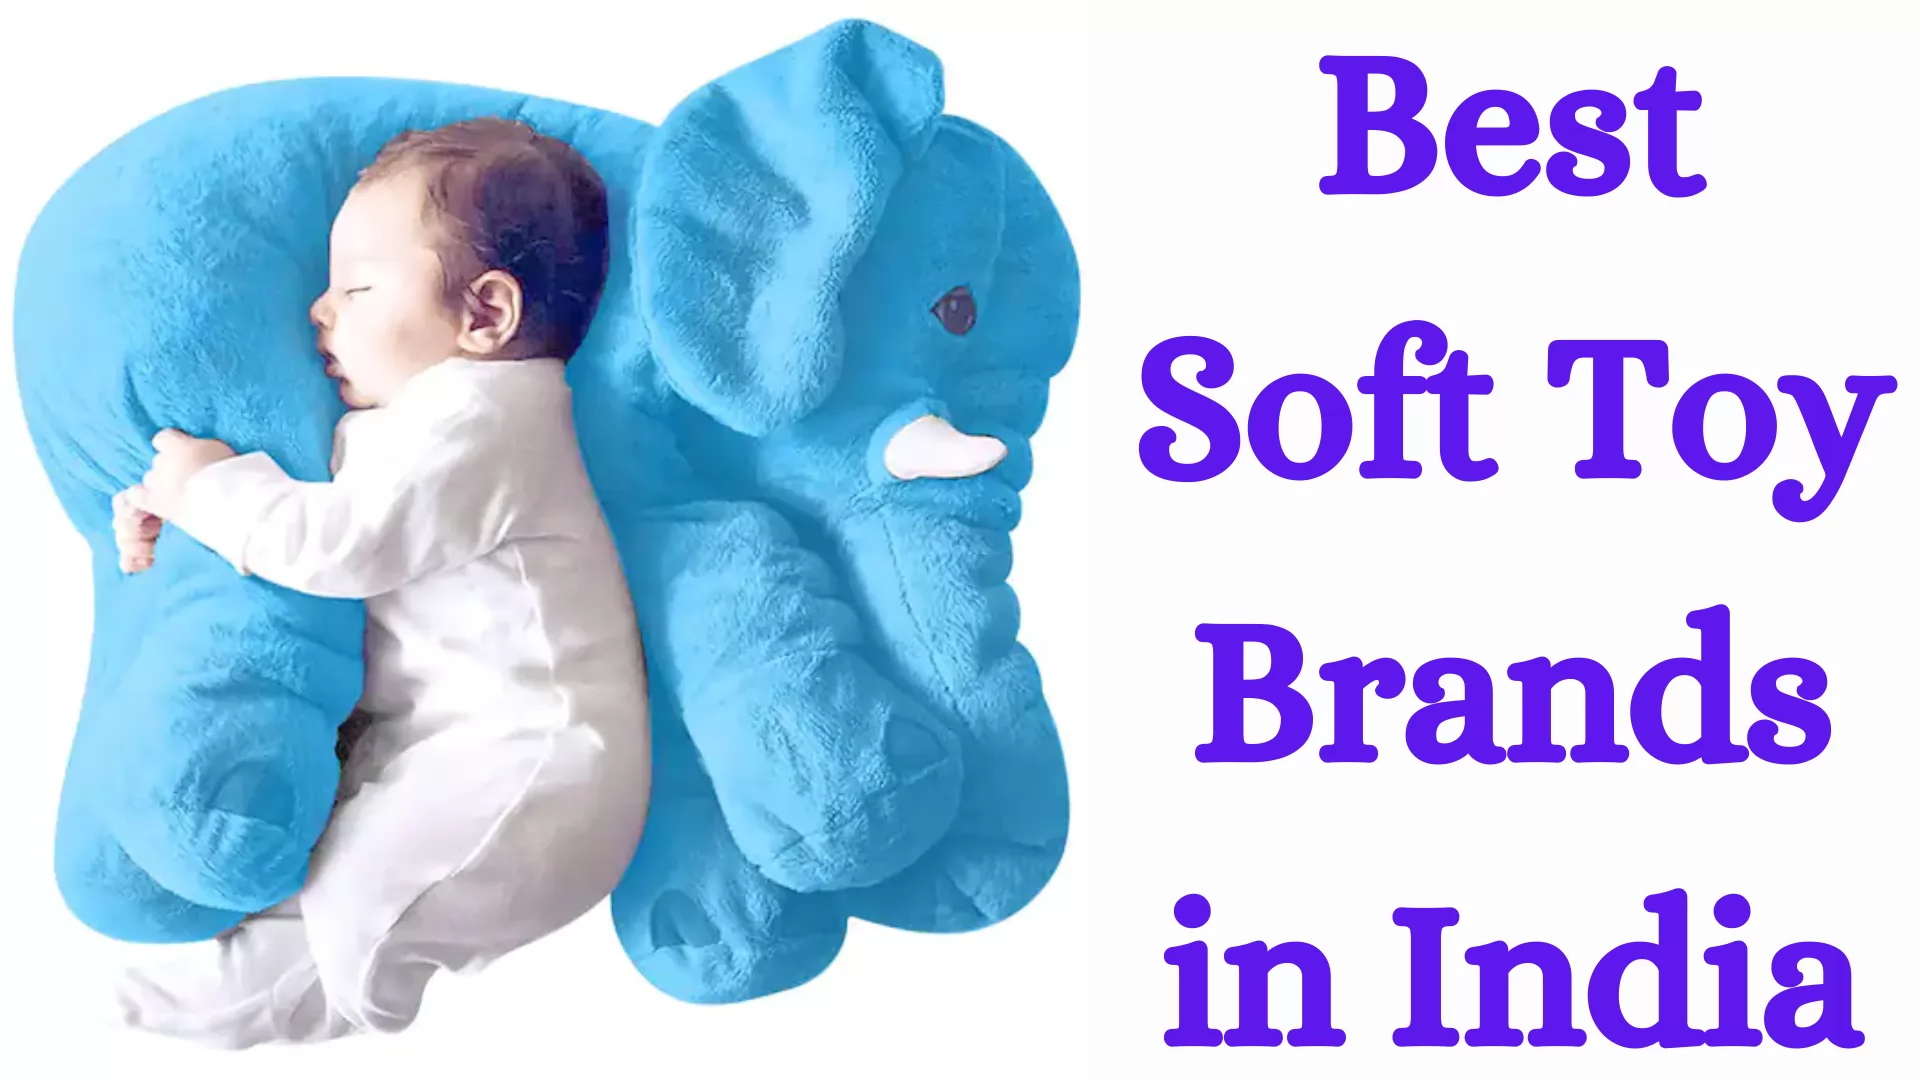 12 Best Soft Toy Brands in India: For Both Kids & Adults